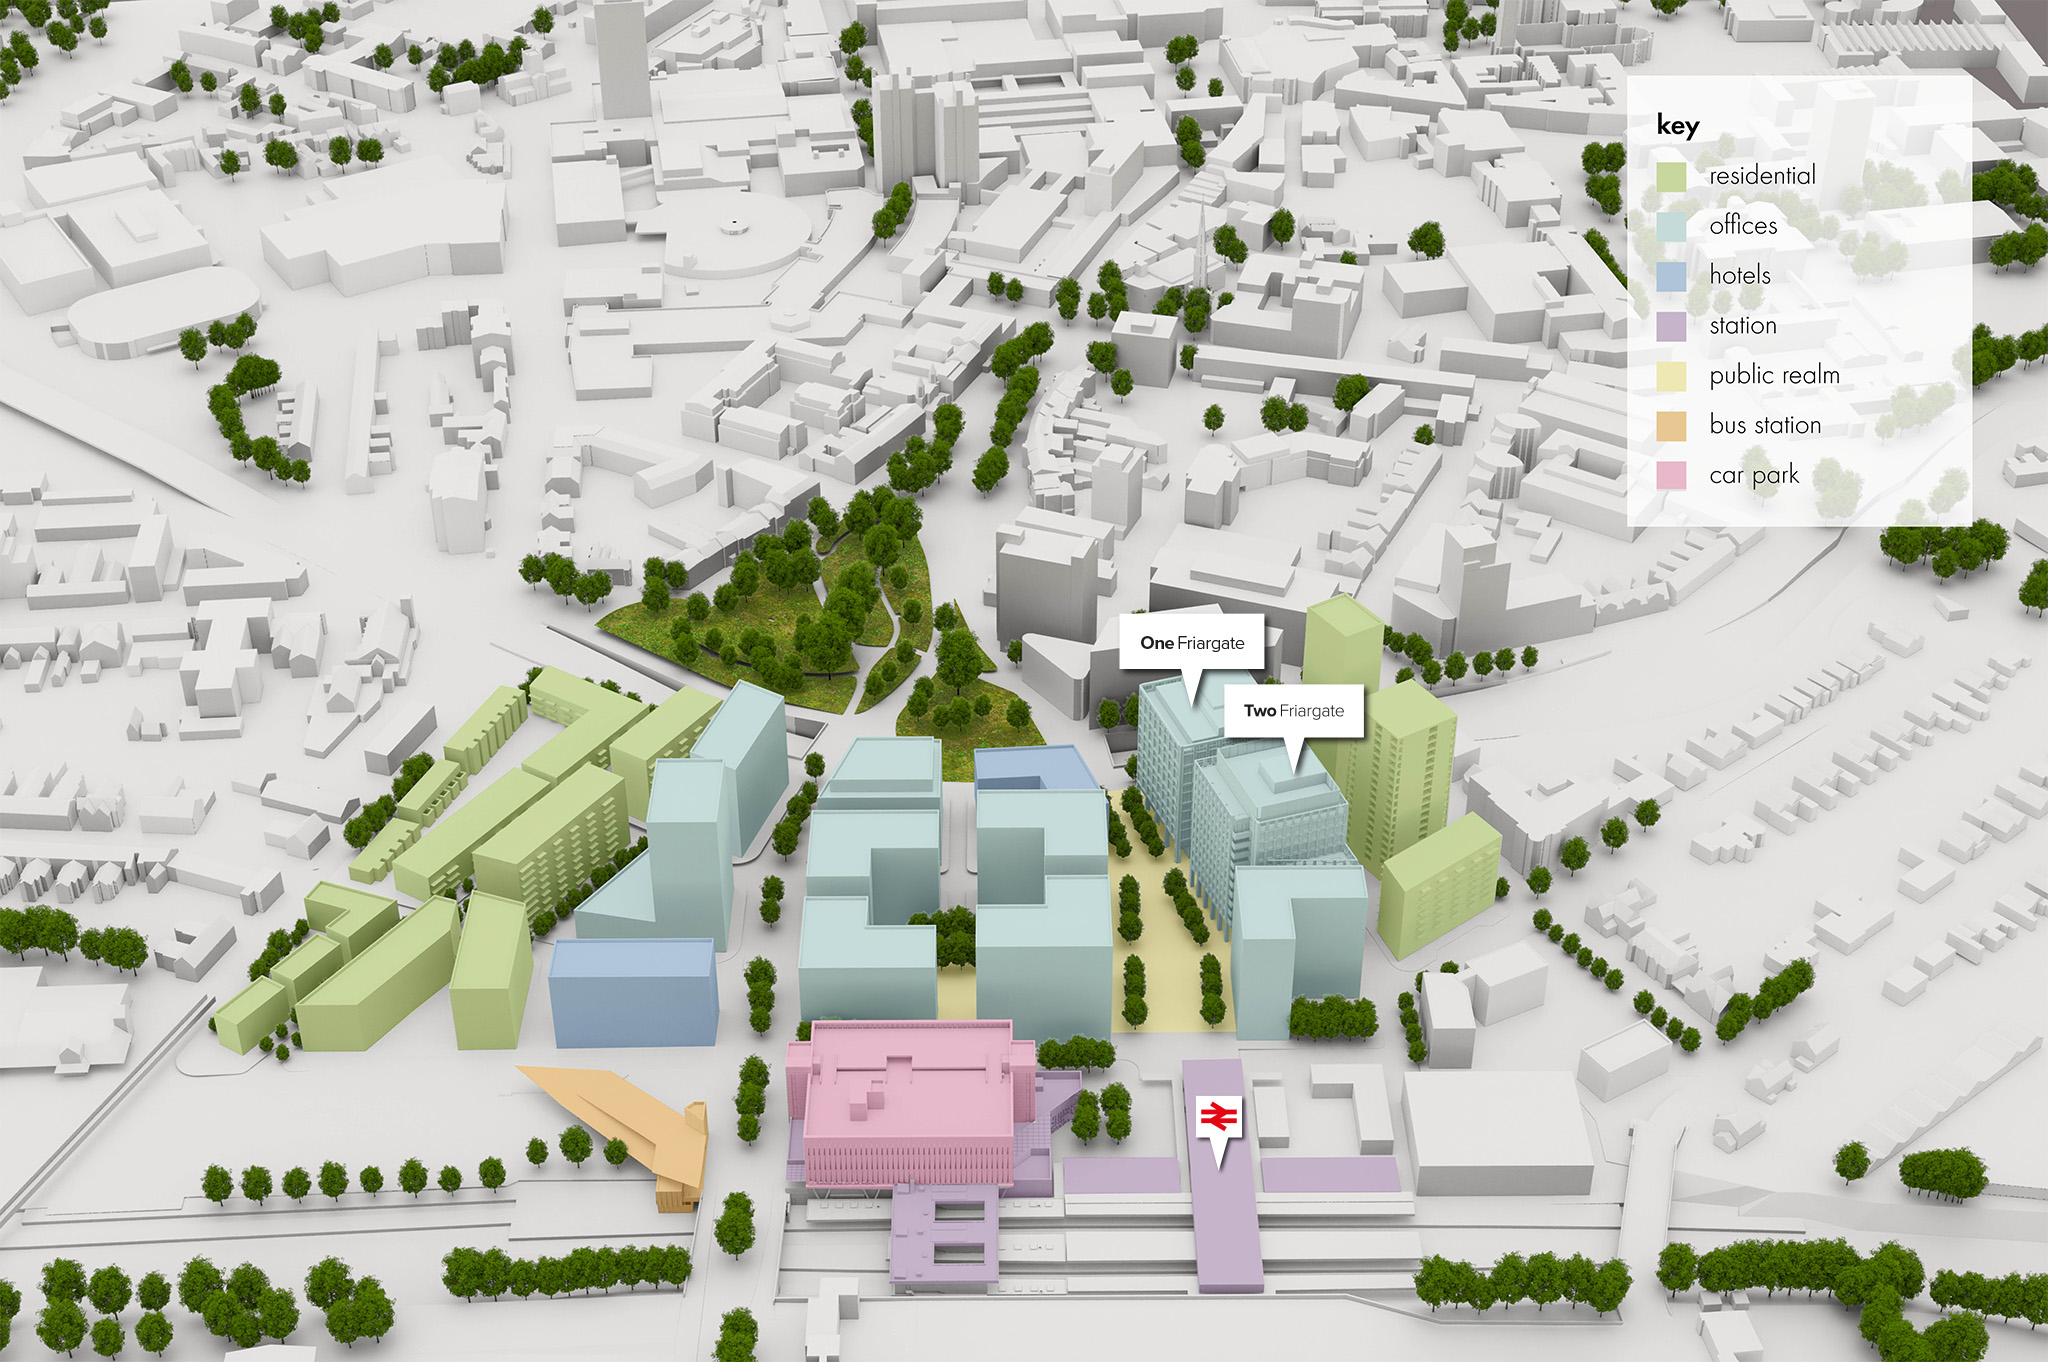 Aerial view of the Friargate development highlighting key buildings. Illustration.